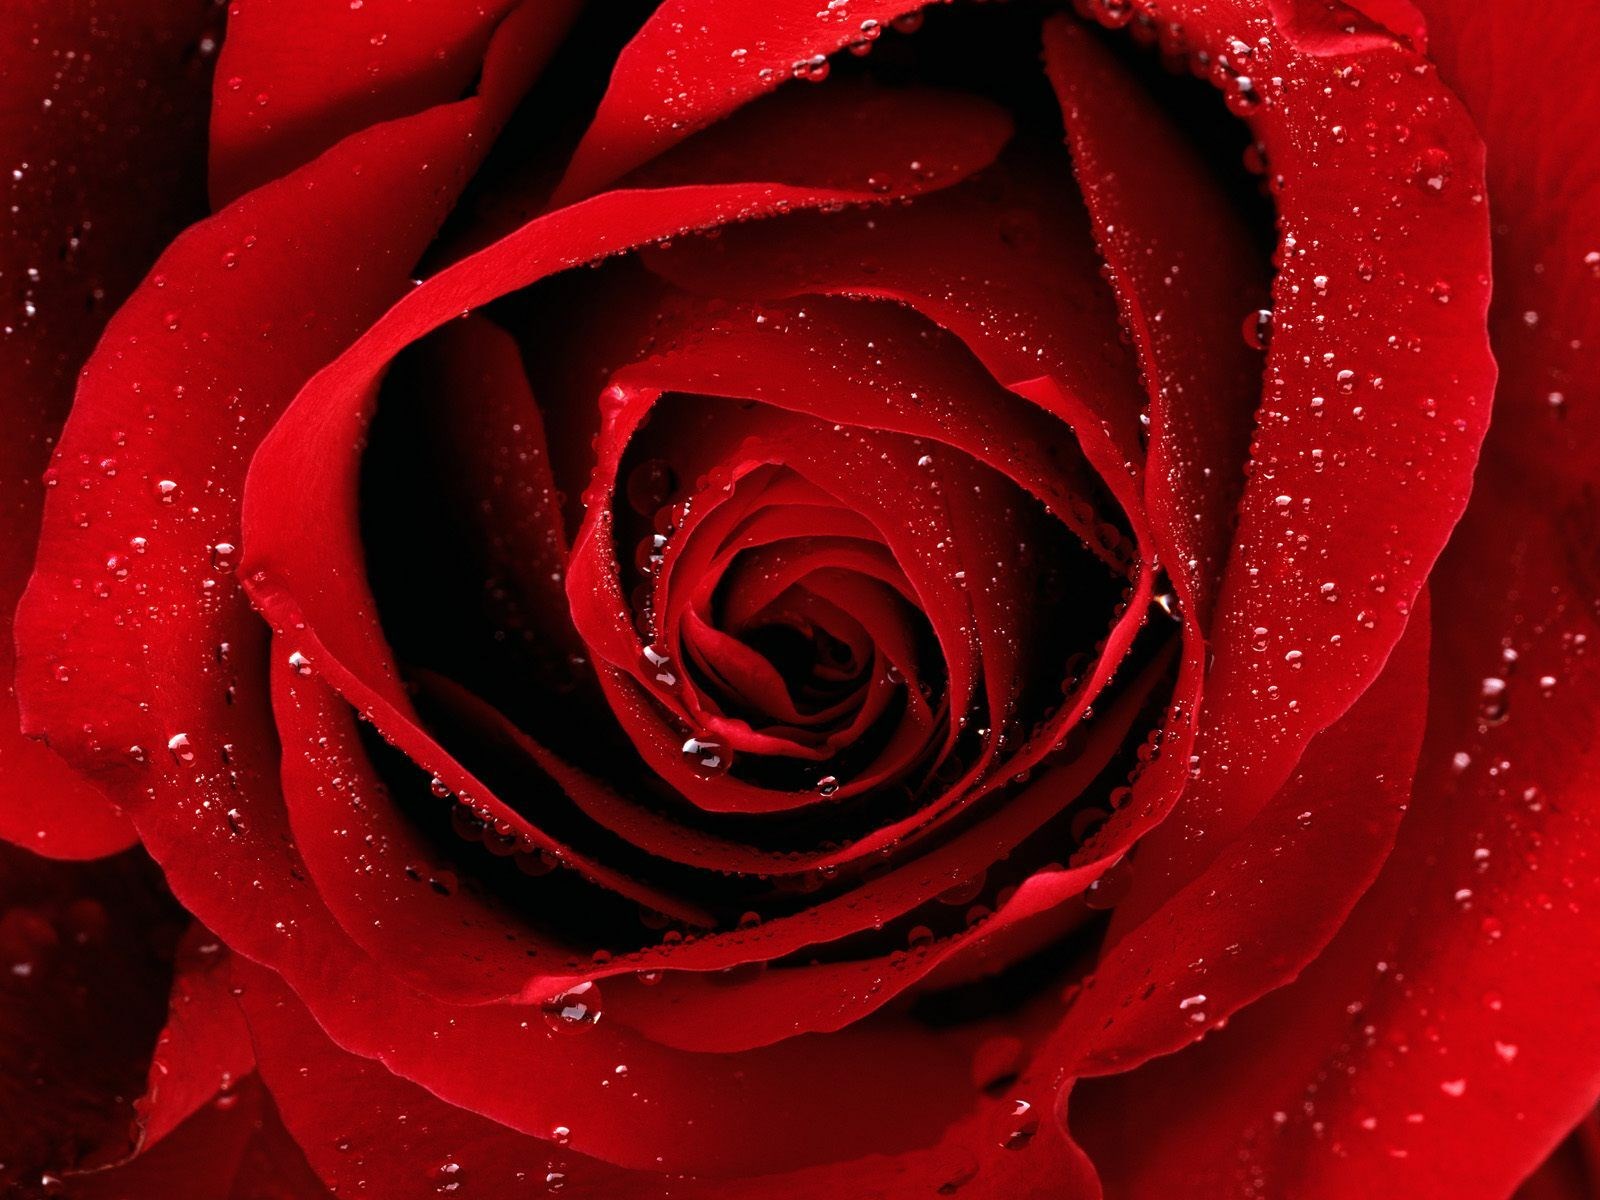 Rose Mobile Wallpapers, HD Rose Backgrounds, Free Images Download